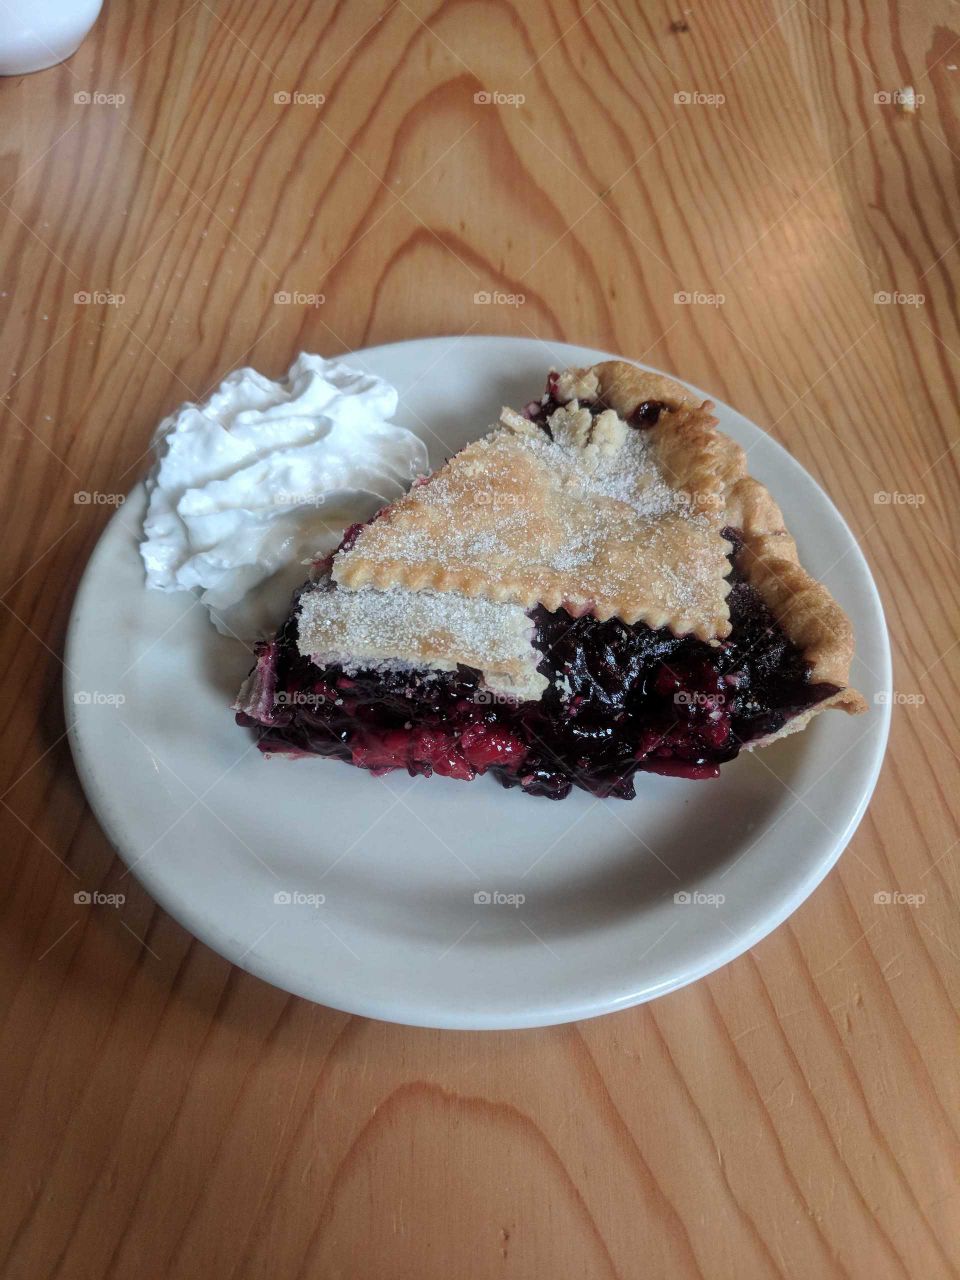 Blackberry Huckleberry Pie Slice at Loula's Cafe in Whitefish, Montana (Near Glacier National Park)